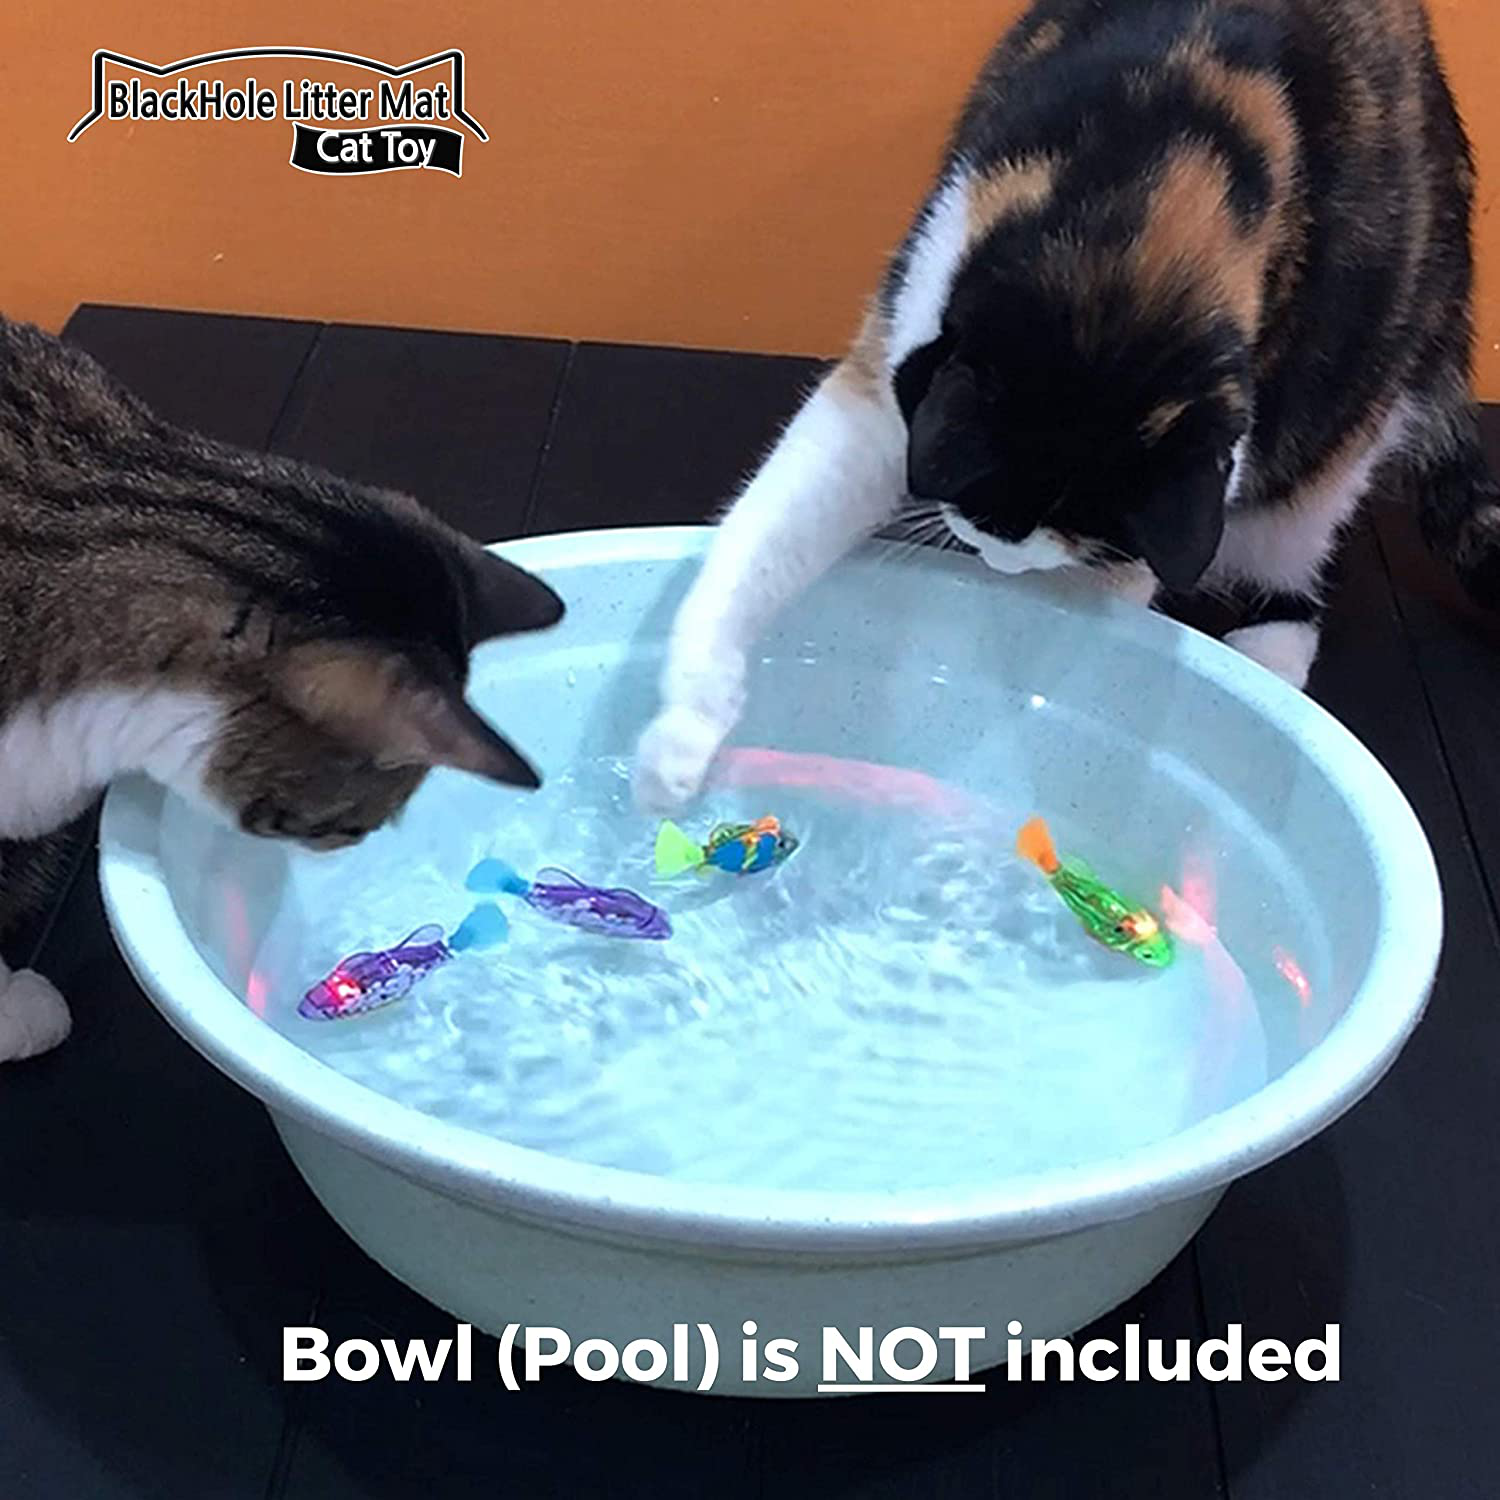 Indoor Cat Interactive Swimming Fish Toy- Best Water Cat Toy for Indoor Cats, Play Fishing, Good Exercise Activity, Drink More Water, Led Light, Battery Included (Swimming Bowl/Pool Is Not Included)